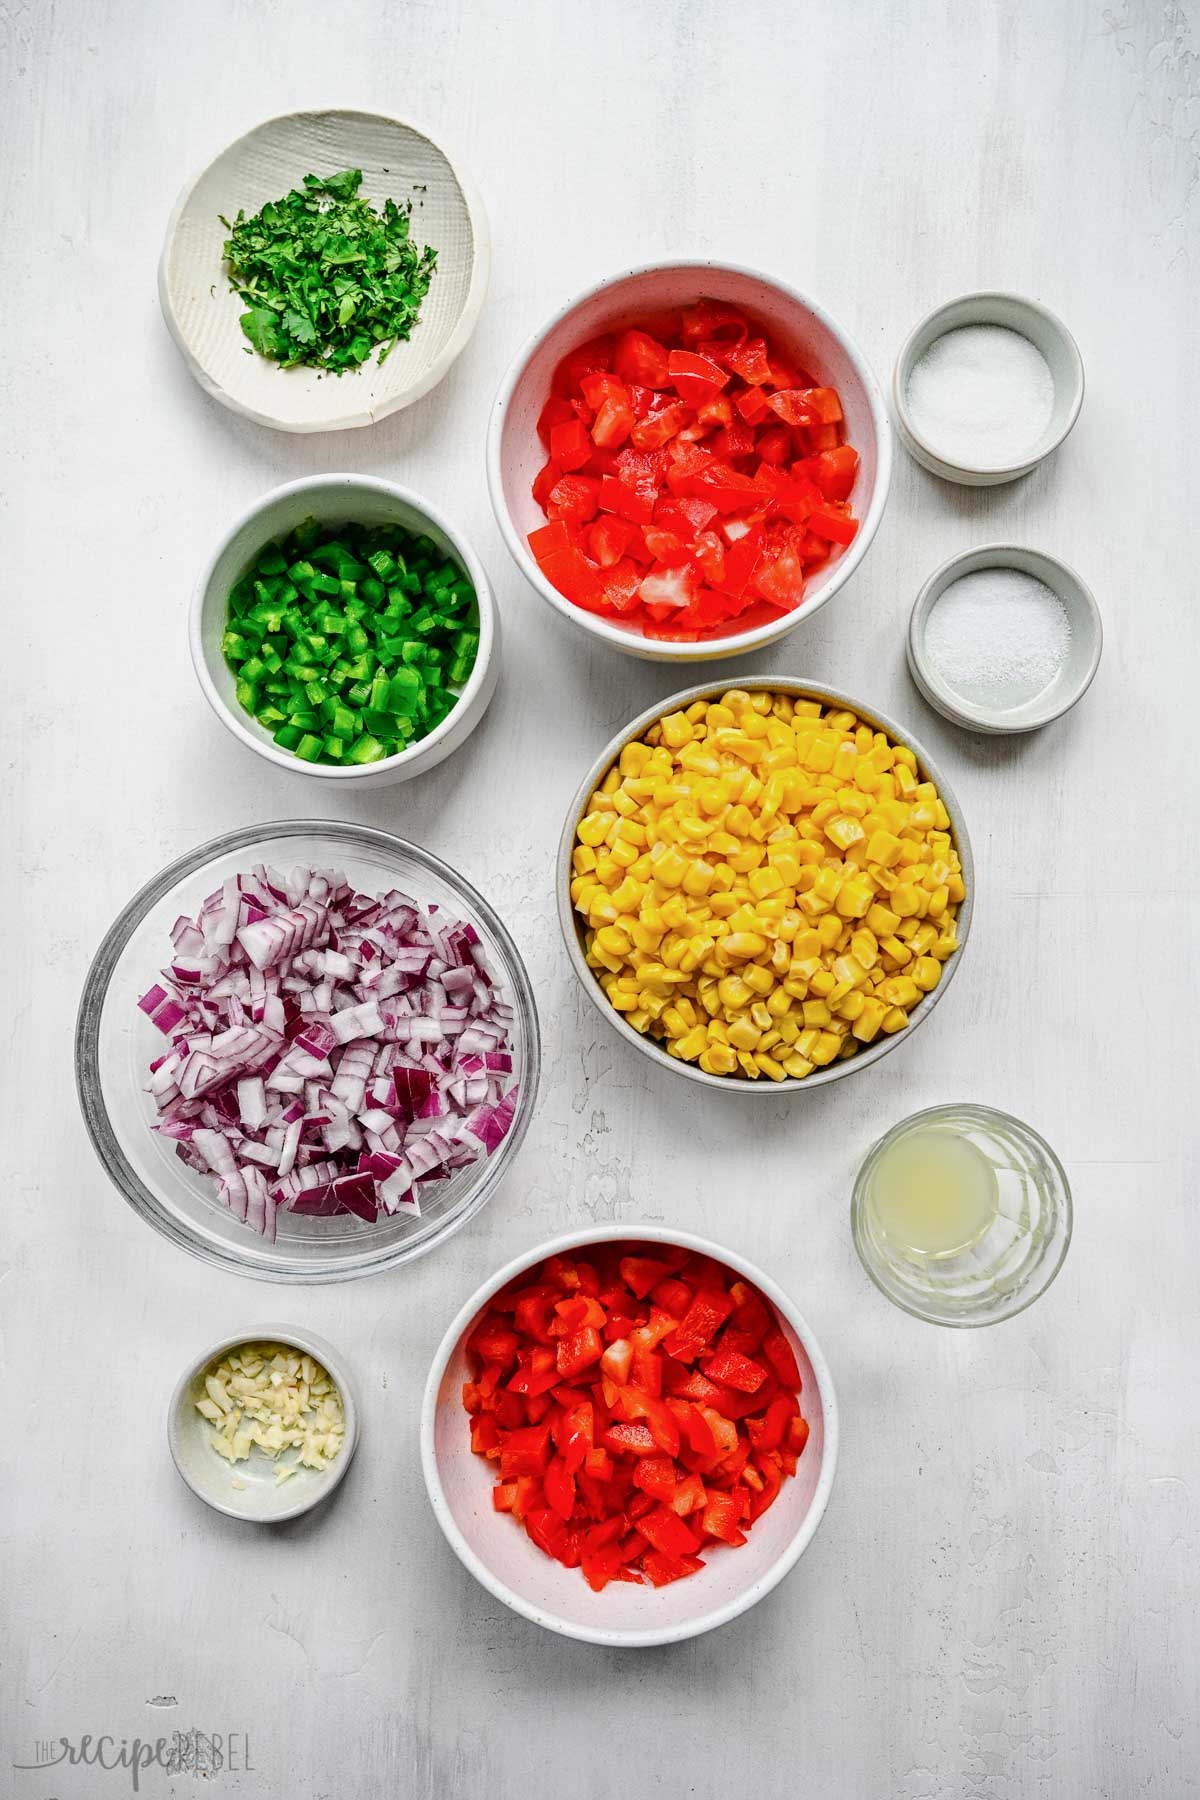 Top view of ingredients needed to make corn salsa.